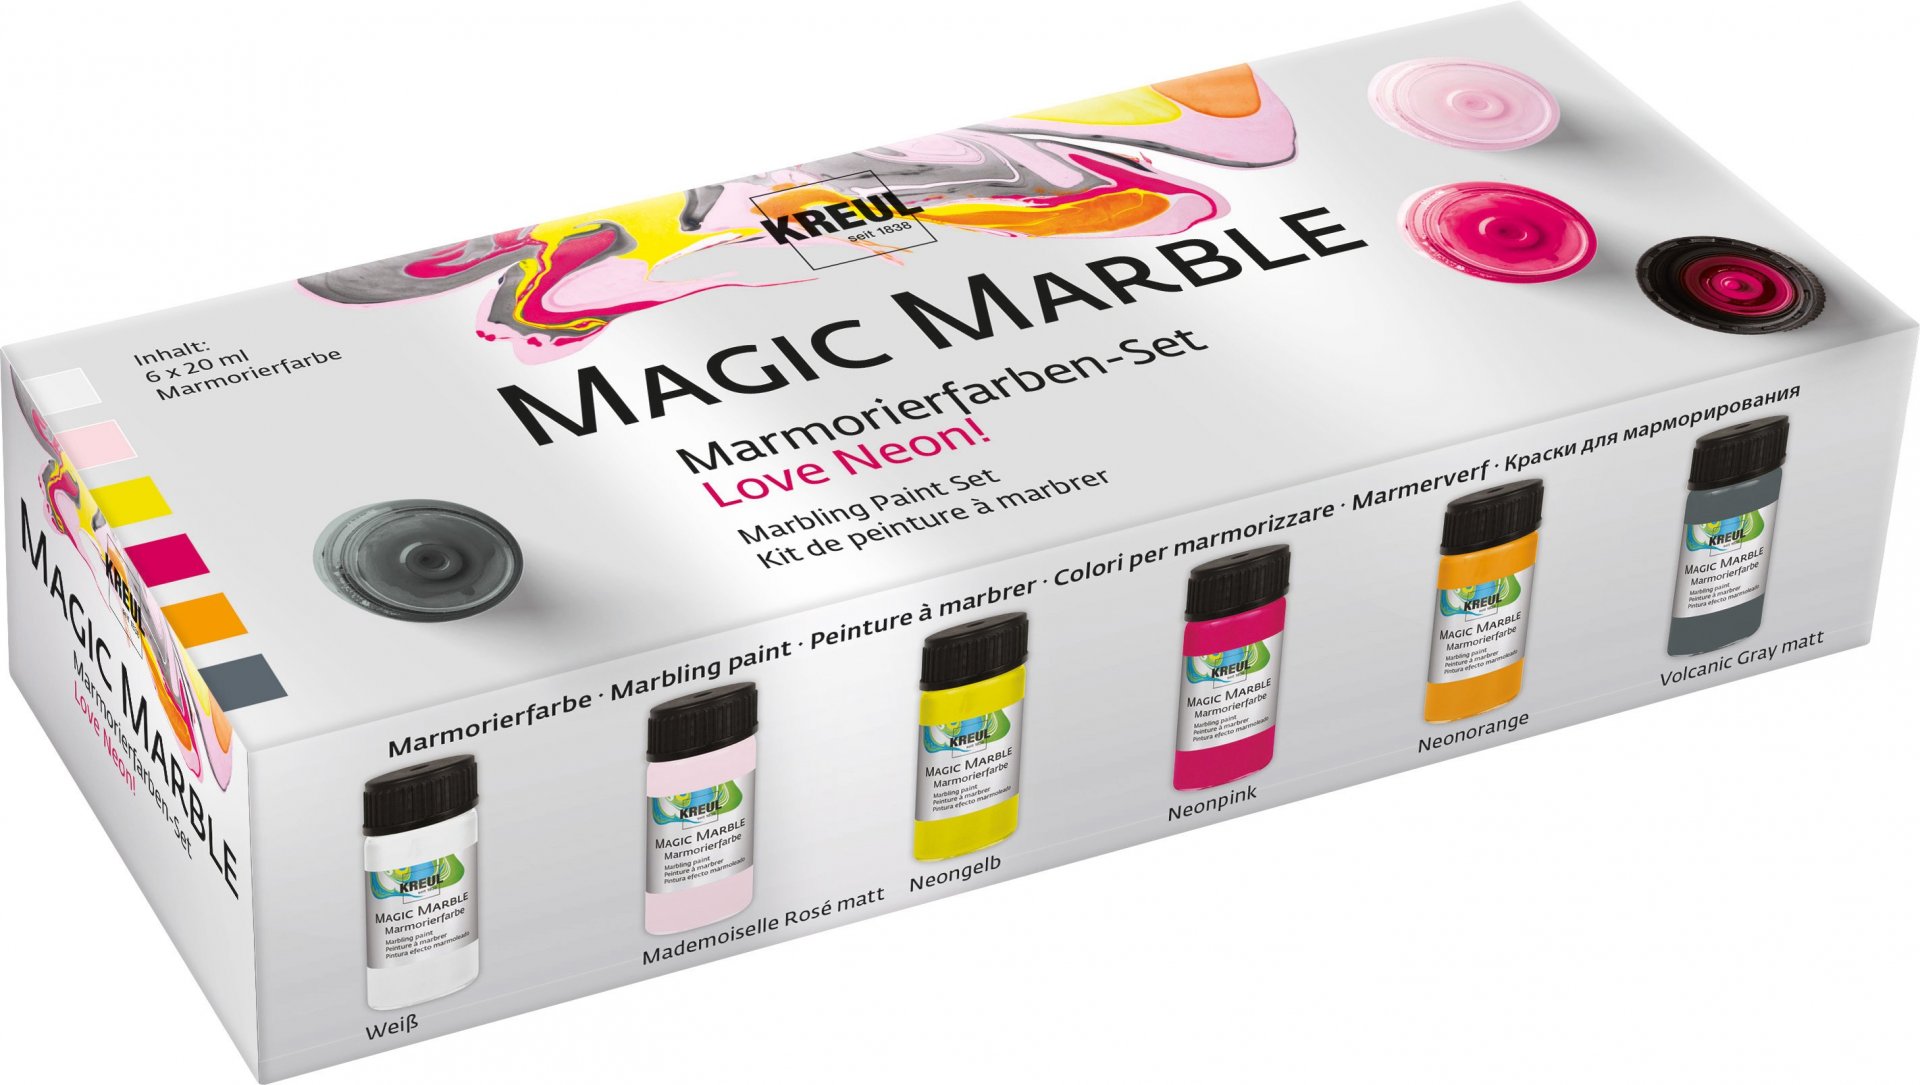 MADE BY ME made by me marbling paint studio, 25-piece marbling kit for  kids, make 10 pour paint art projects, dip & paint marbling arts